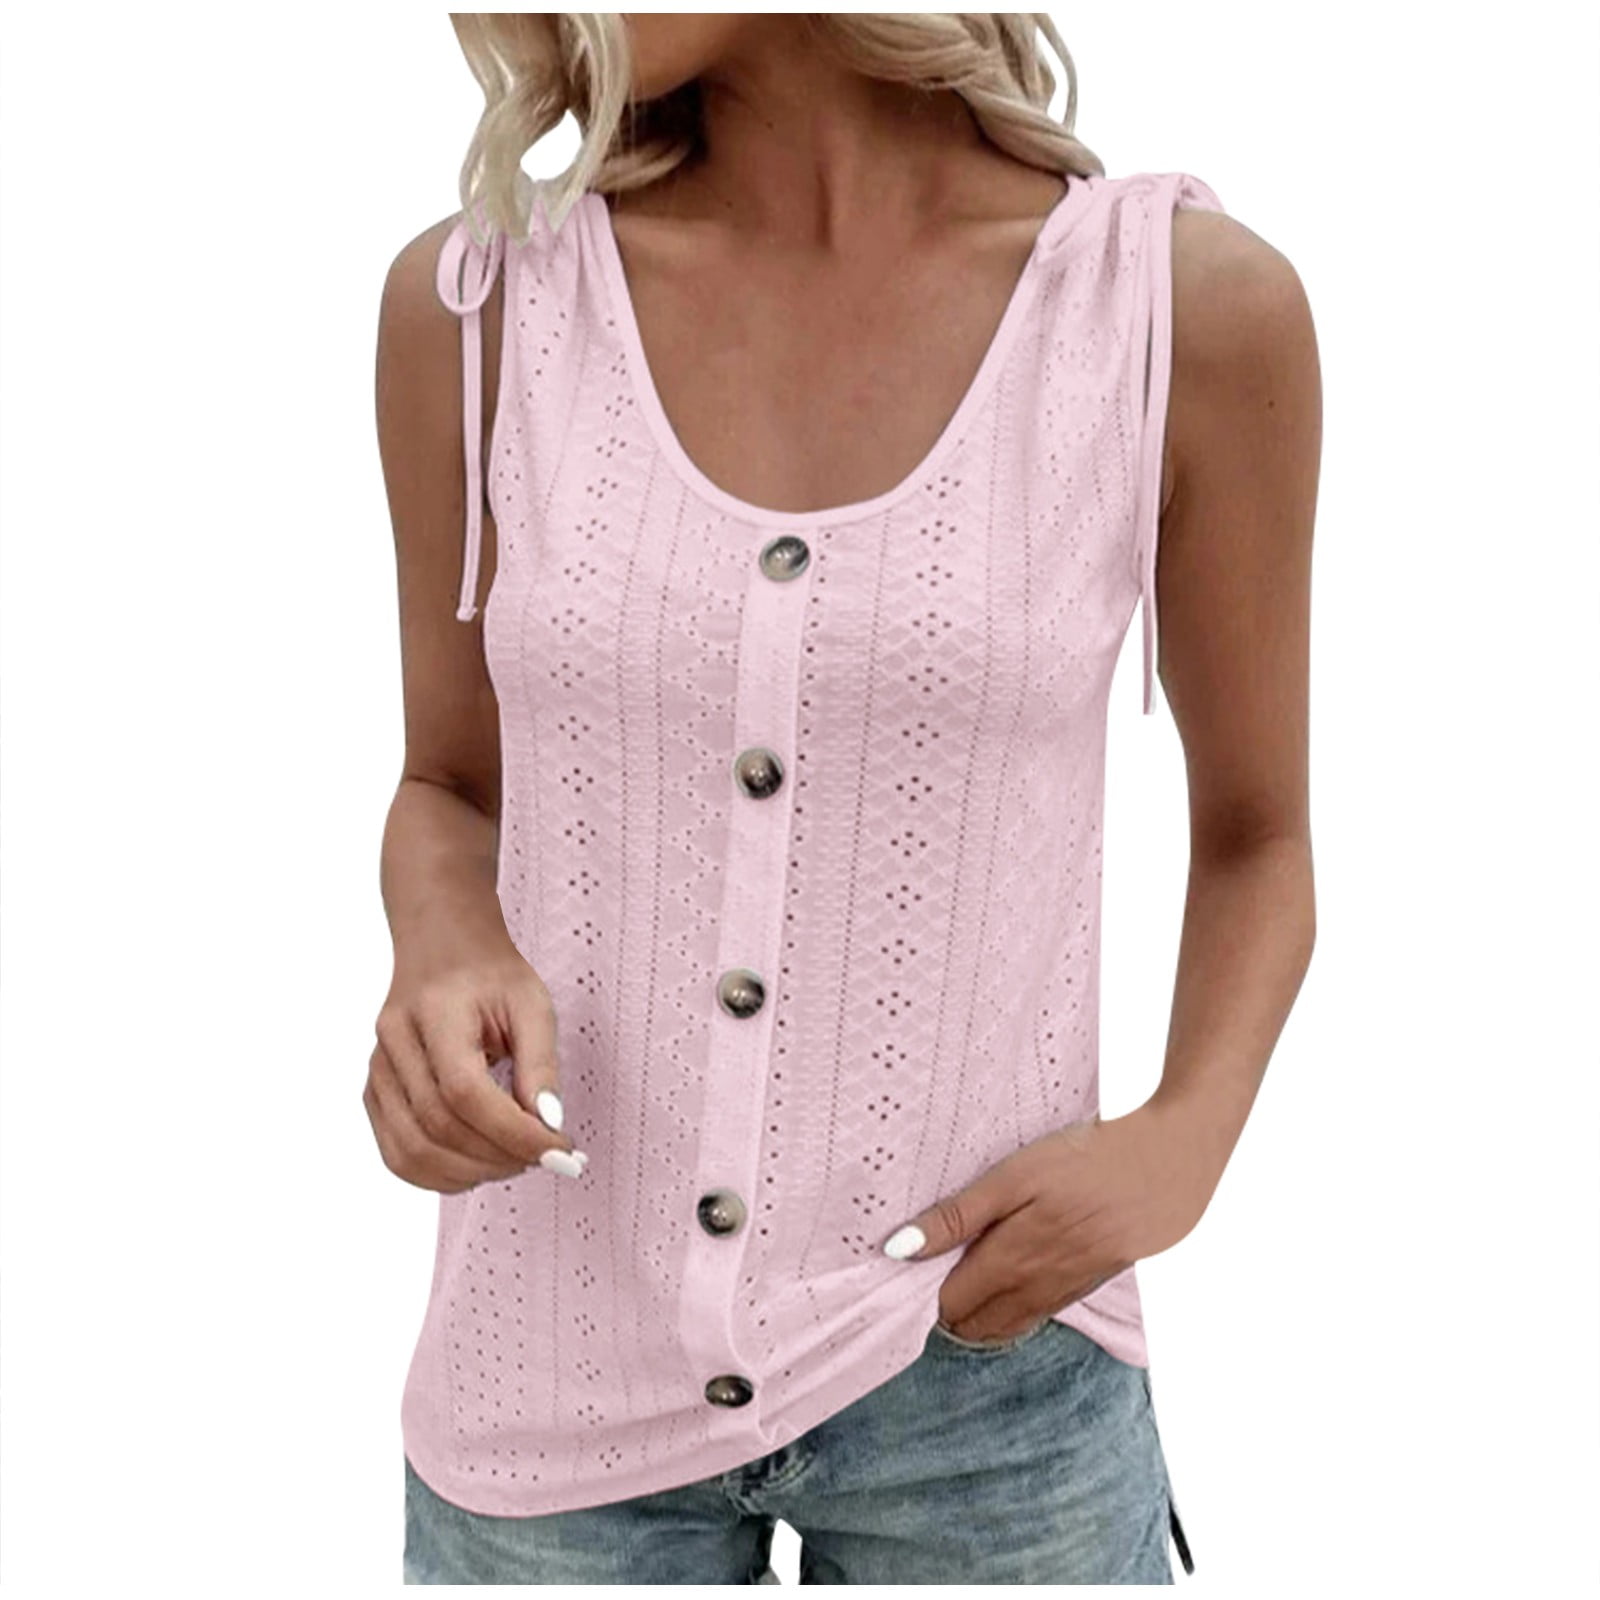 Qcmgmg Workout Tank Tops Button Shoulder Tie Eyelet Ladies Tops ...